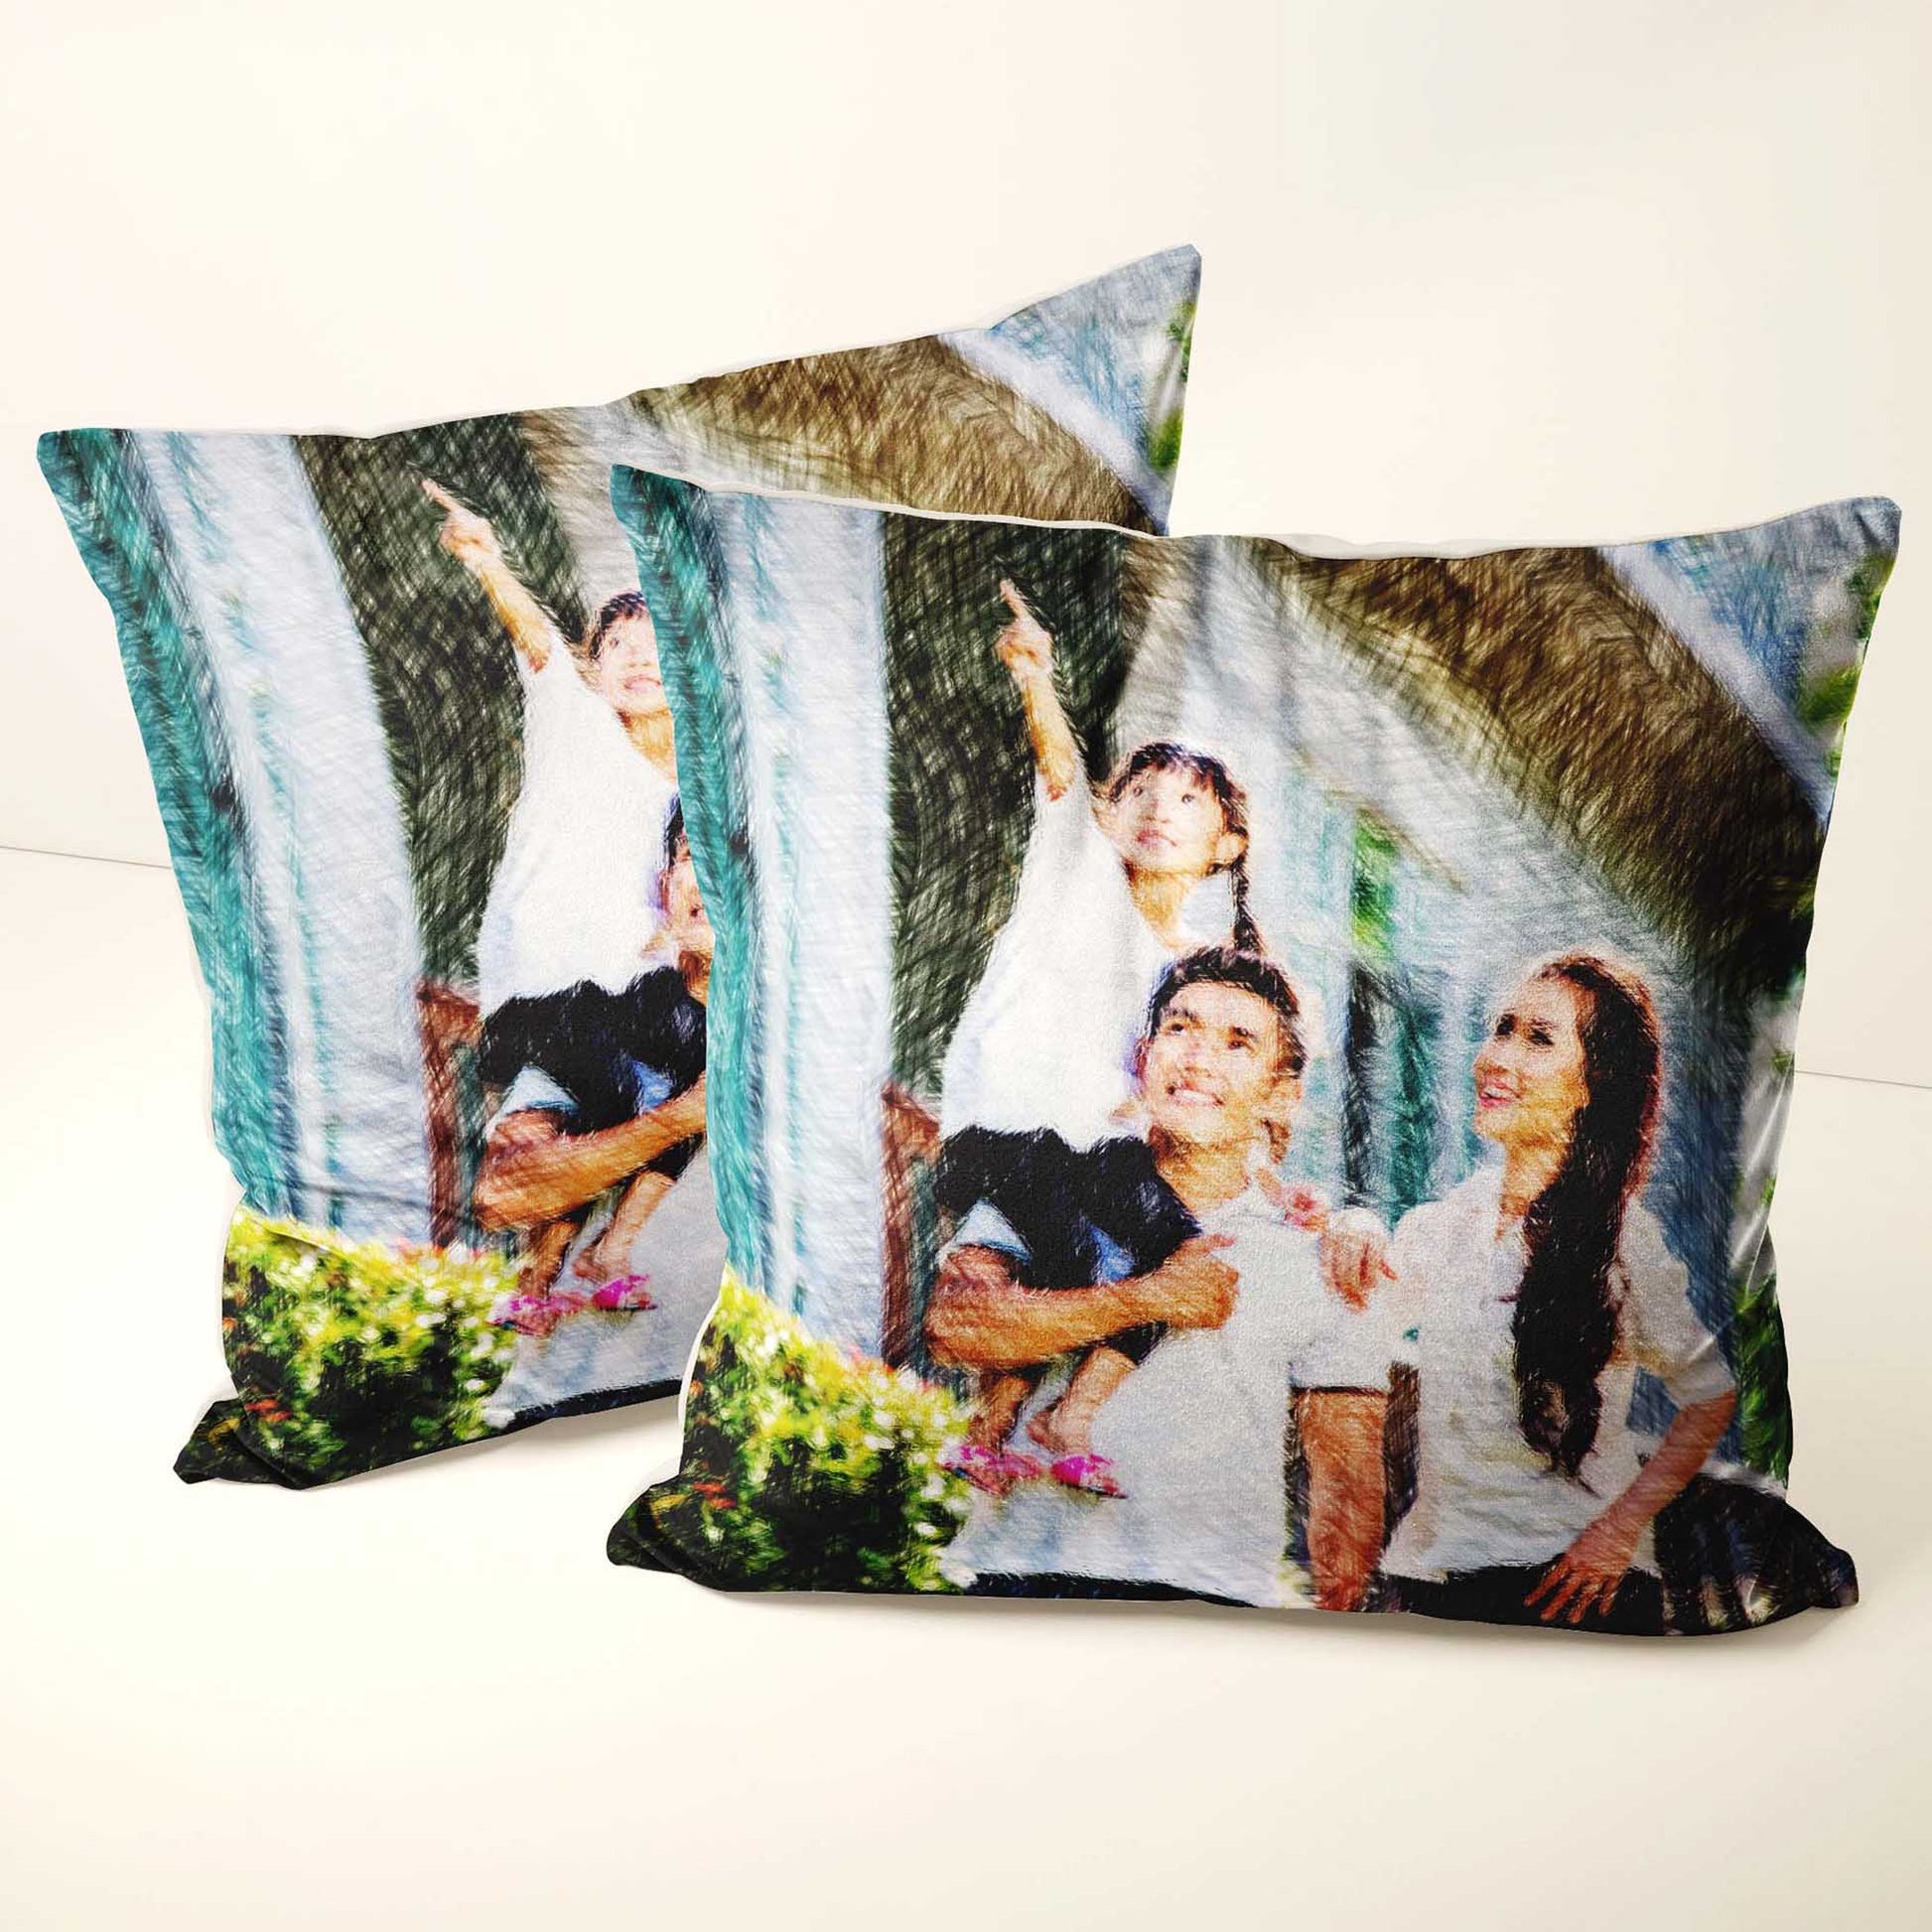 Make a statement with our Personalised Colourful Drawing Cushion. Designed to turn your photo into a beautiful drawing, this soft velvet cushion adds a touch of fun and personality to your home. It's the perfect spot to chill, relax